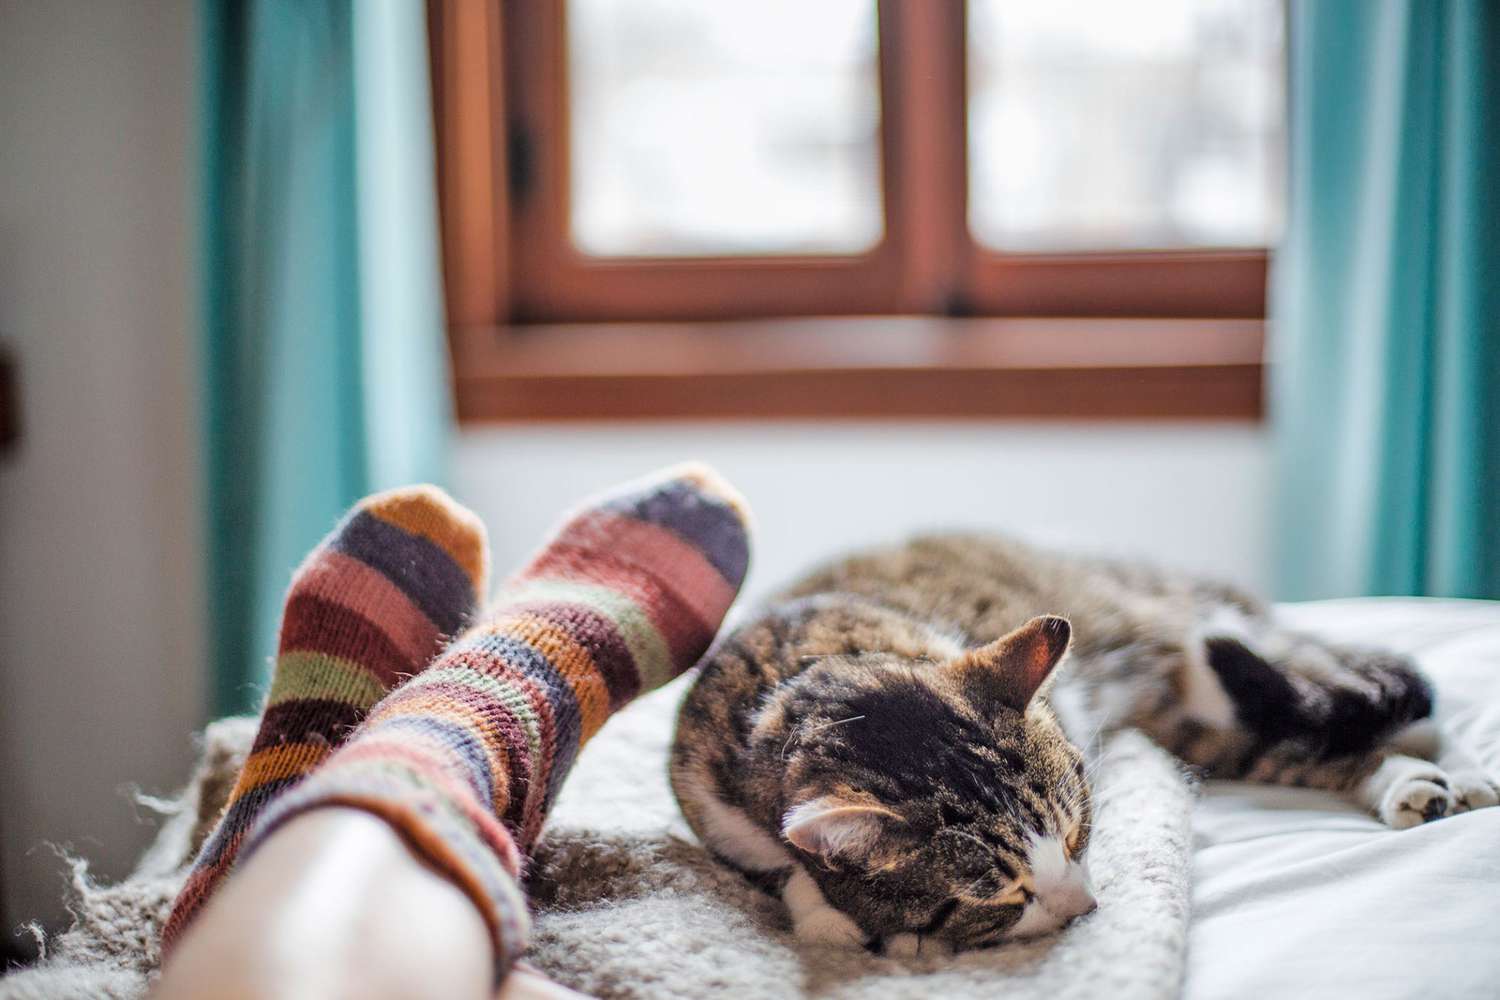 cat sleeping and the end of a bed next to a girl with striped socks.